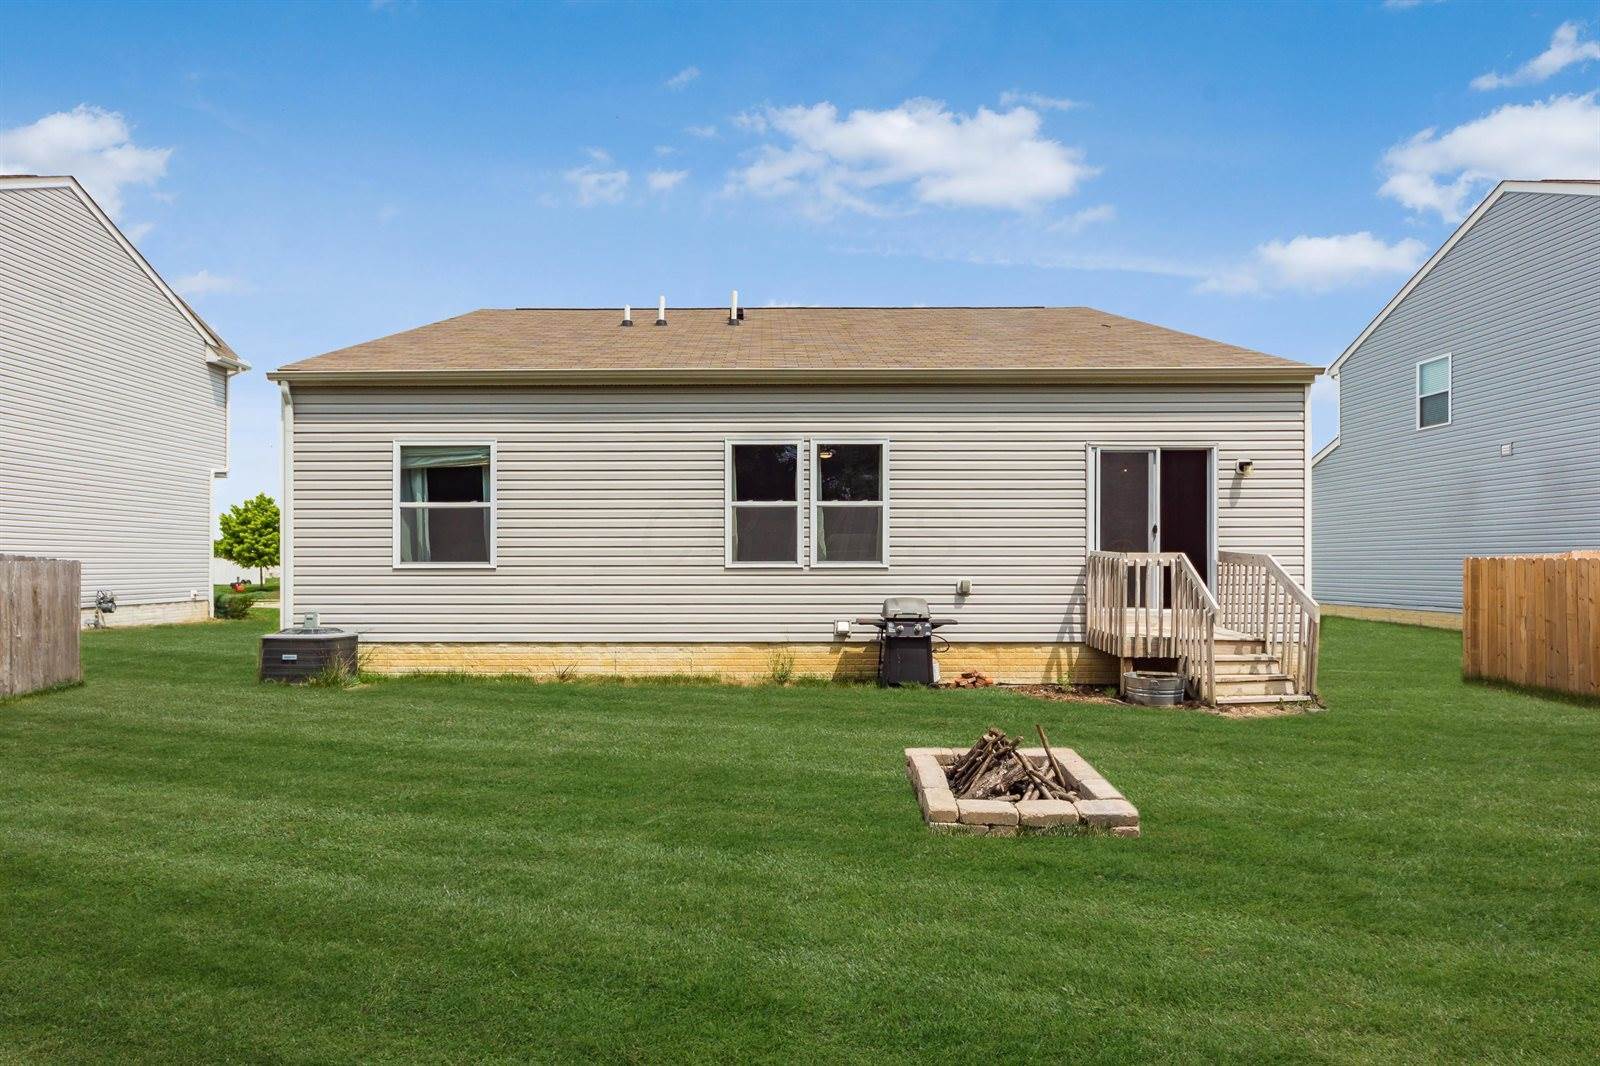 423 Wingate Place, Mount Sterling, OH 43143